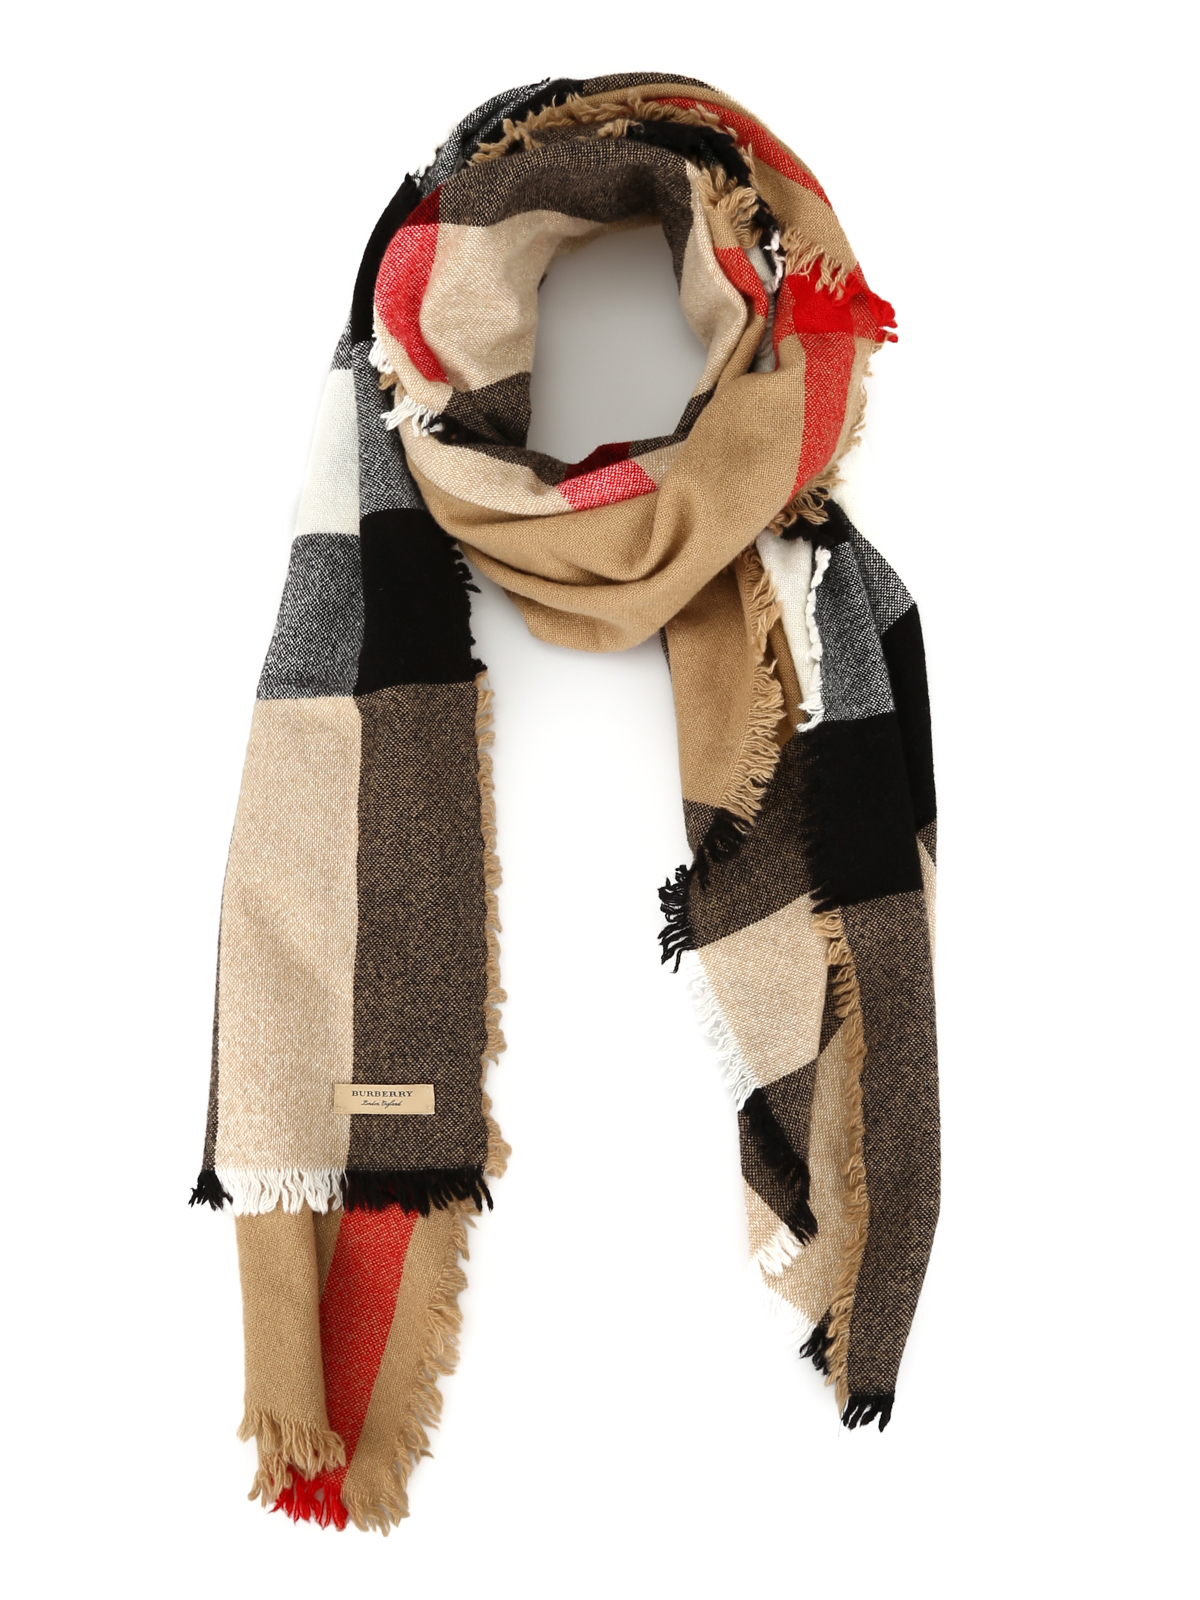 burberry scarf cashmere wool